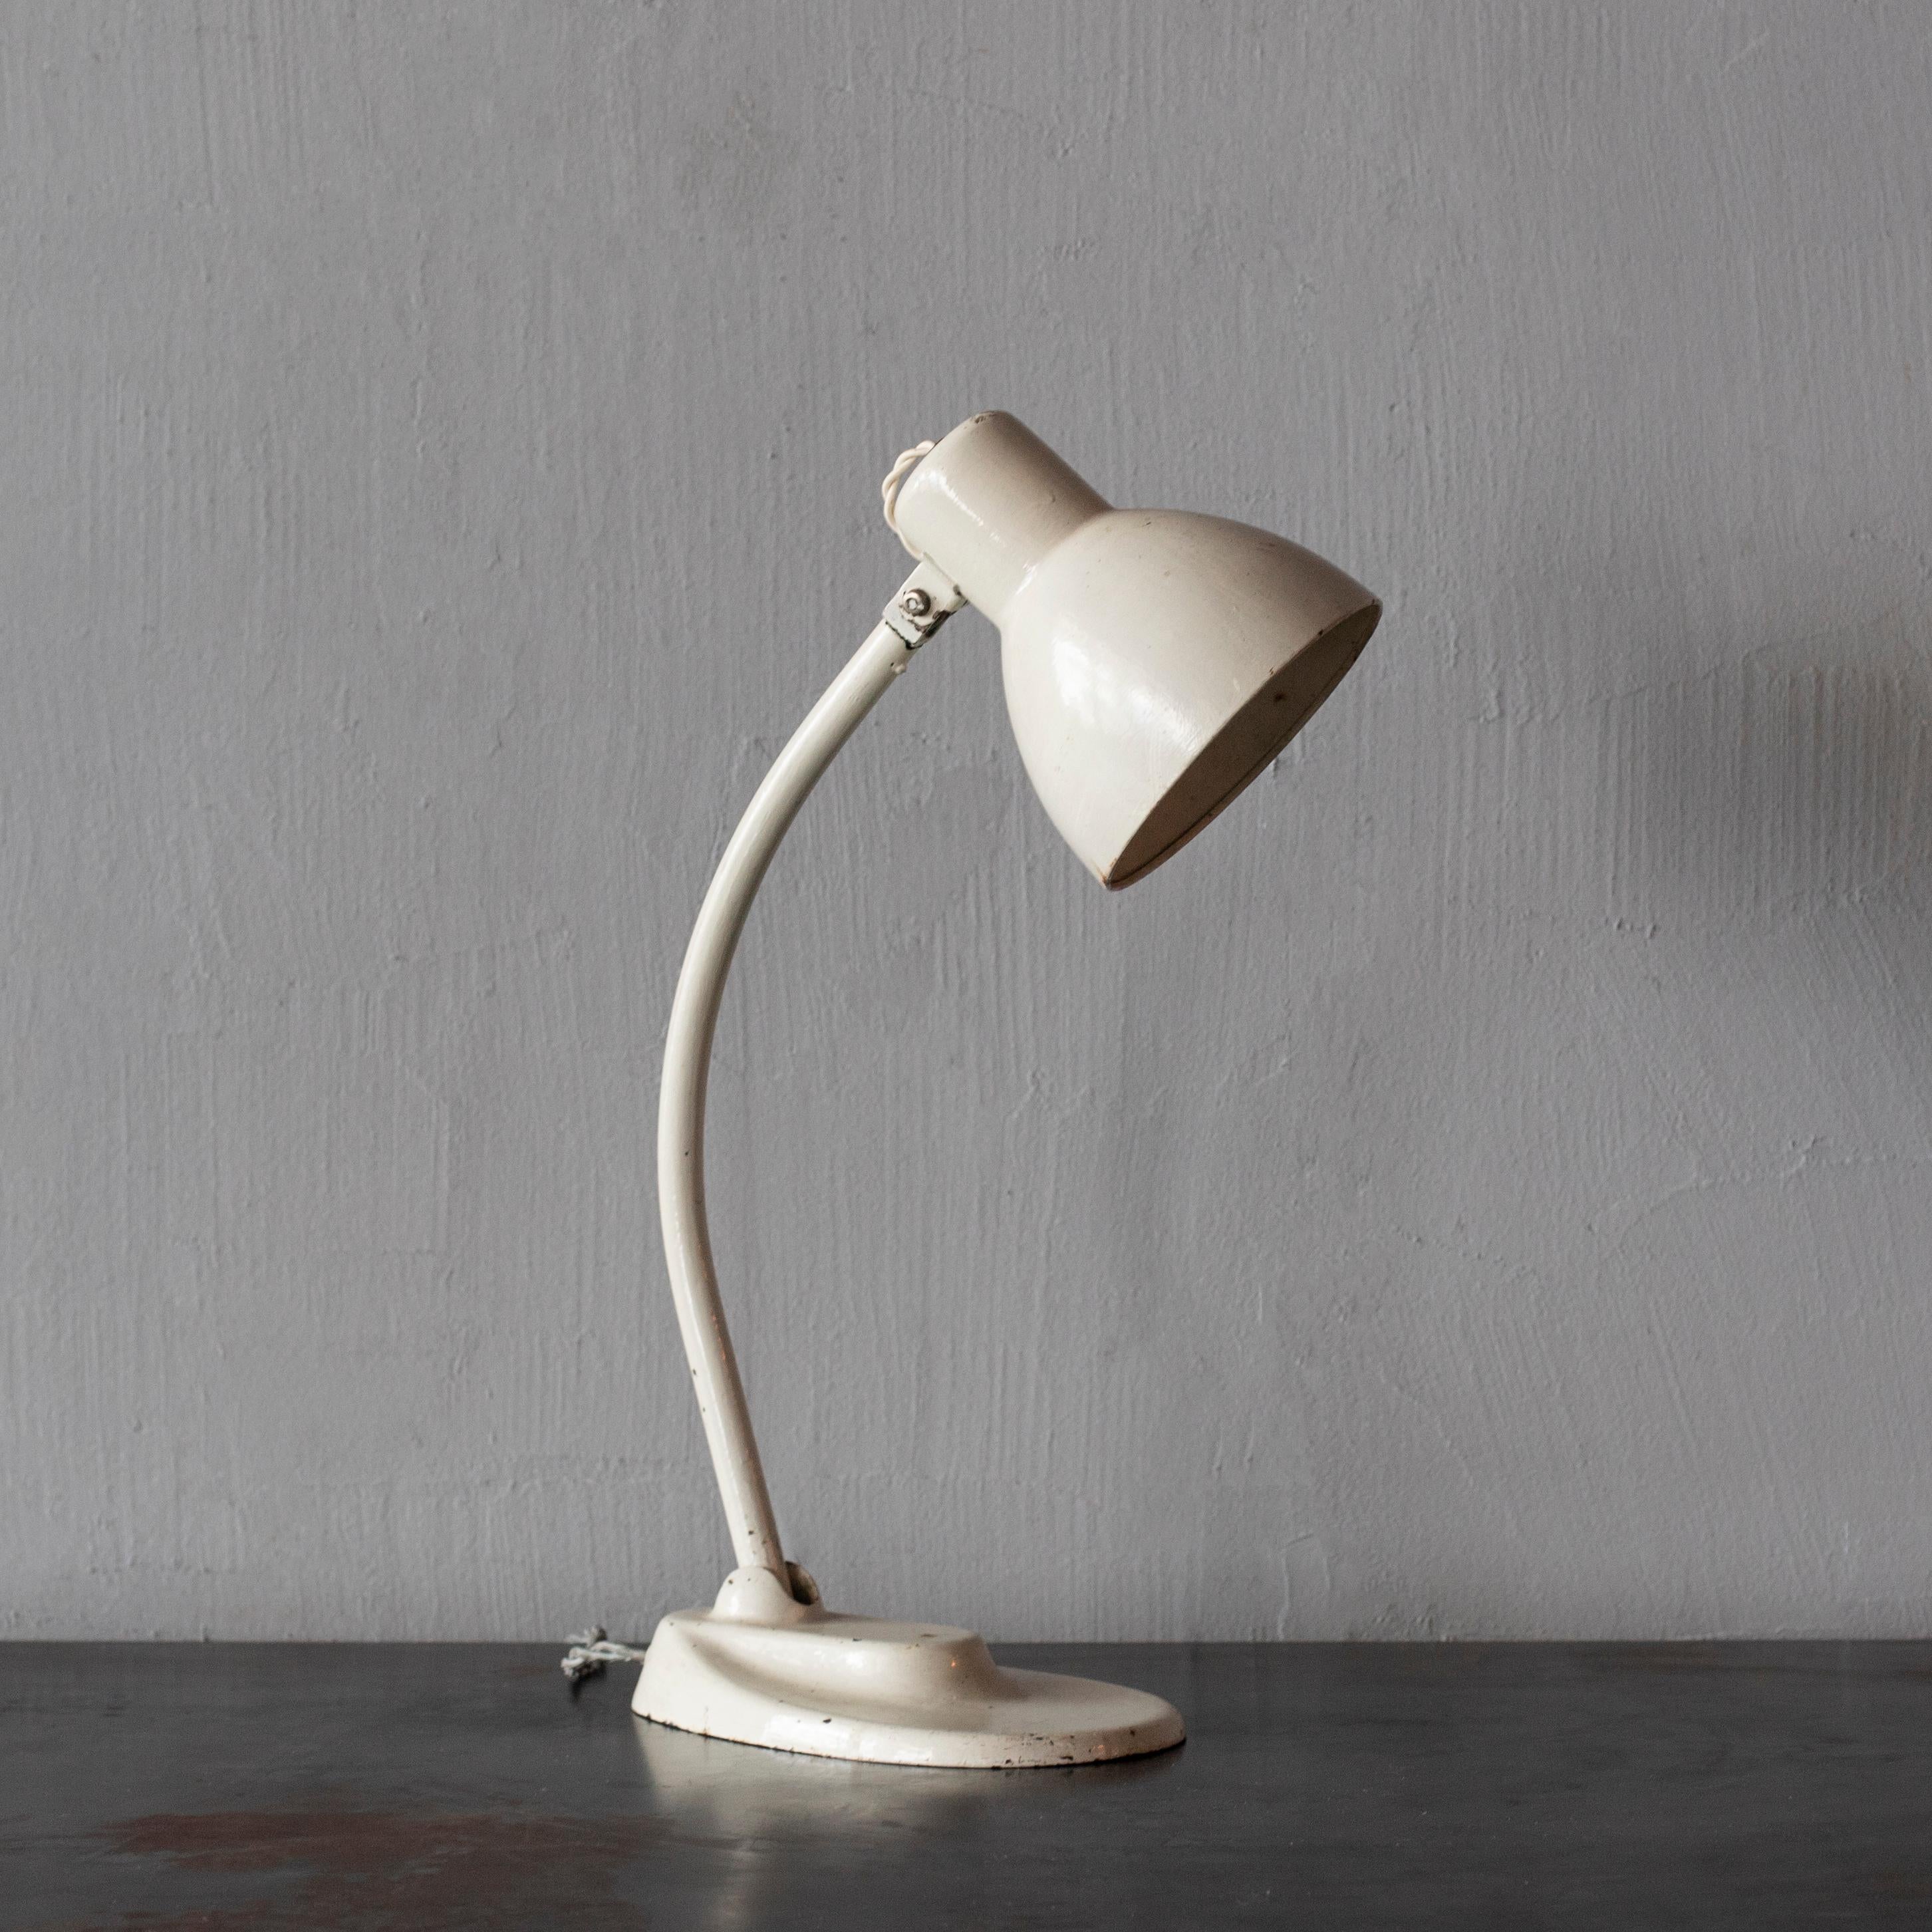 Kandem desk lamp, 1930s, Germany

Iron base with articulated arm and shade in original white paint.
Designed by Marianne Brandt & Hin Bredendieck, produced by Korting & Mathiesen.

Rewired. E26 socket.